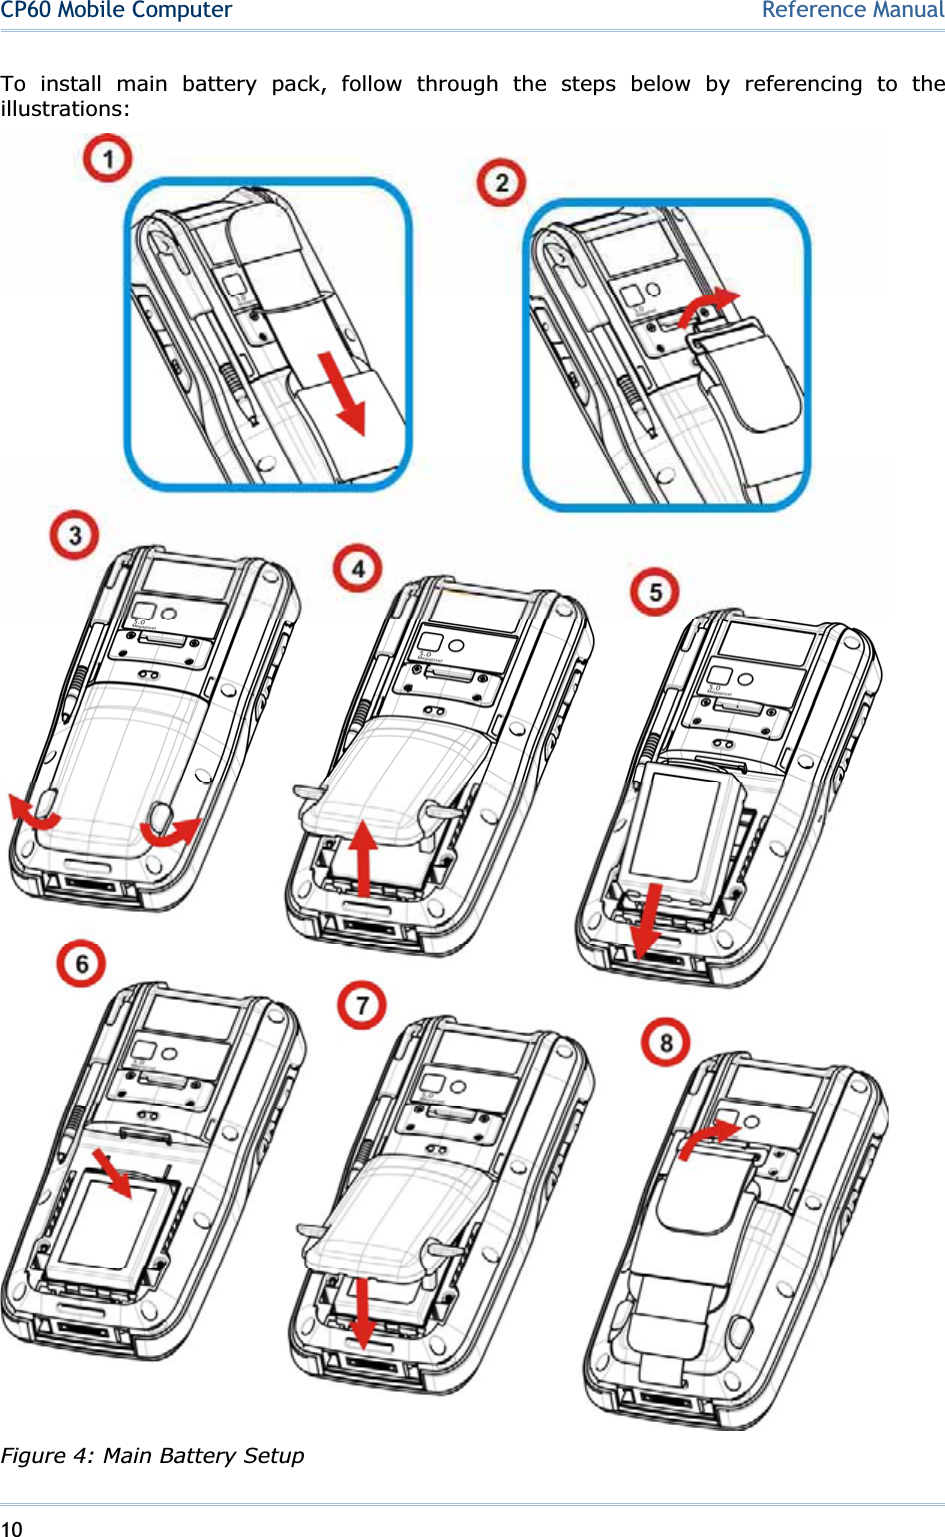 10CP60 Mobile Computer Reference ManualTo install main battery pack, follow through the steps below by referencing to the illustrations:Figure 4: Main Battery Setup 